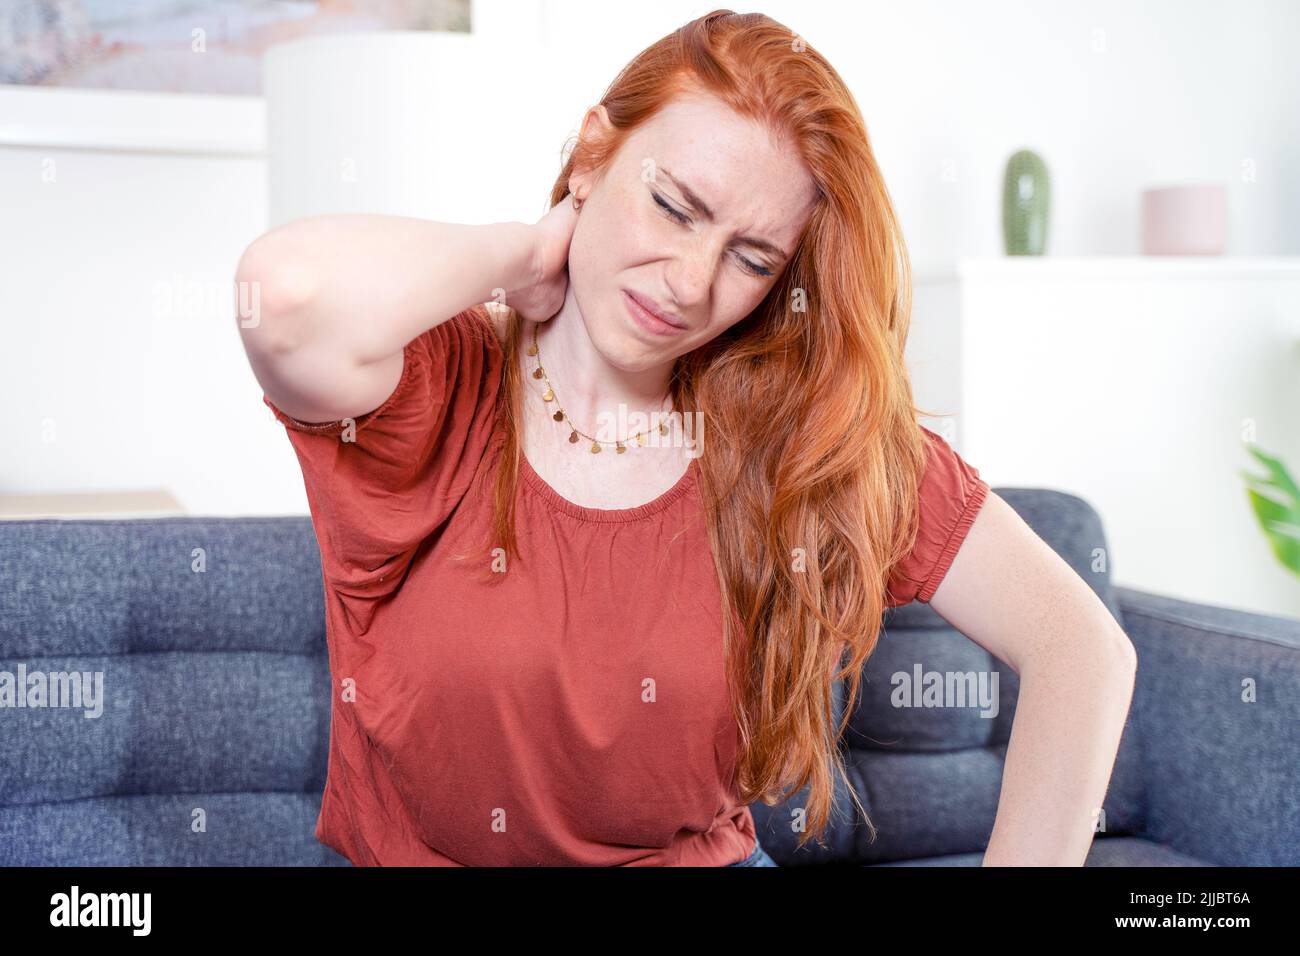 Woman sitting on couch and suffers from neck pain Stock Photo